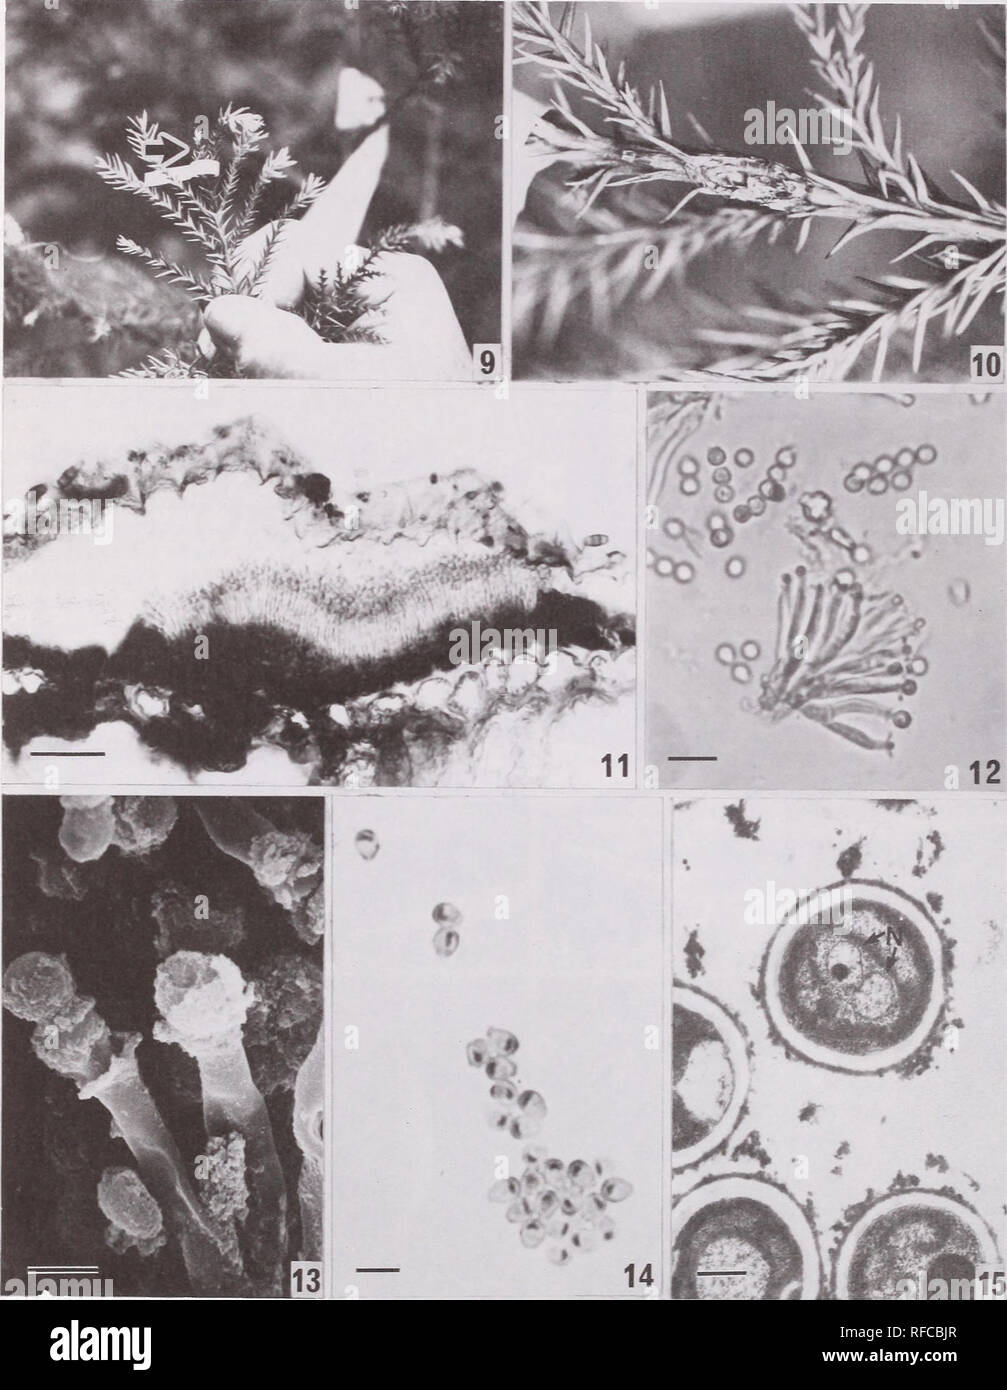 . Recent research on foliage diseases : conference proceedings : Carlisle, Pennsylvania, May 29-June 2, 1989. Leaves Diseases and pests United States Congresses. Figures 9-15.—Twig blight of Japanese cedar. 9. Dead twigs (arrow) resulting from inoculation of wounds. 10. A canker formed on a branch following inoculation. 11. A cross section of an acervulus of the twig blight fungus. 12. Conidia produced in chains from conidiogenous cells in an acervulus. 13. A scan- ning electron micrograph of conidia and conidiogenous cells. 14. Conidia with two nuclei, stained with HCl-Giemsa. 15. A transmiss Stock Photo